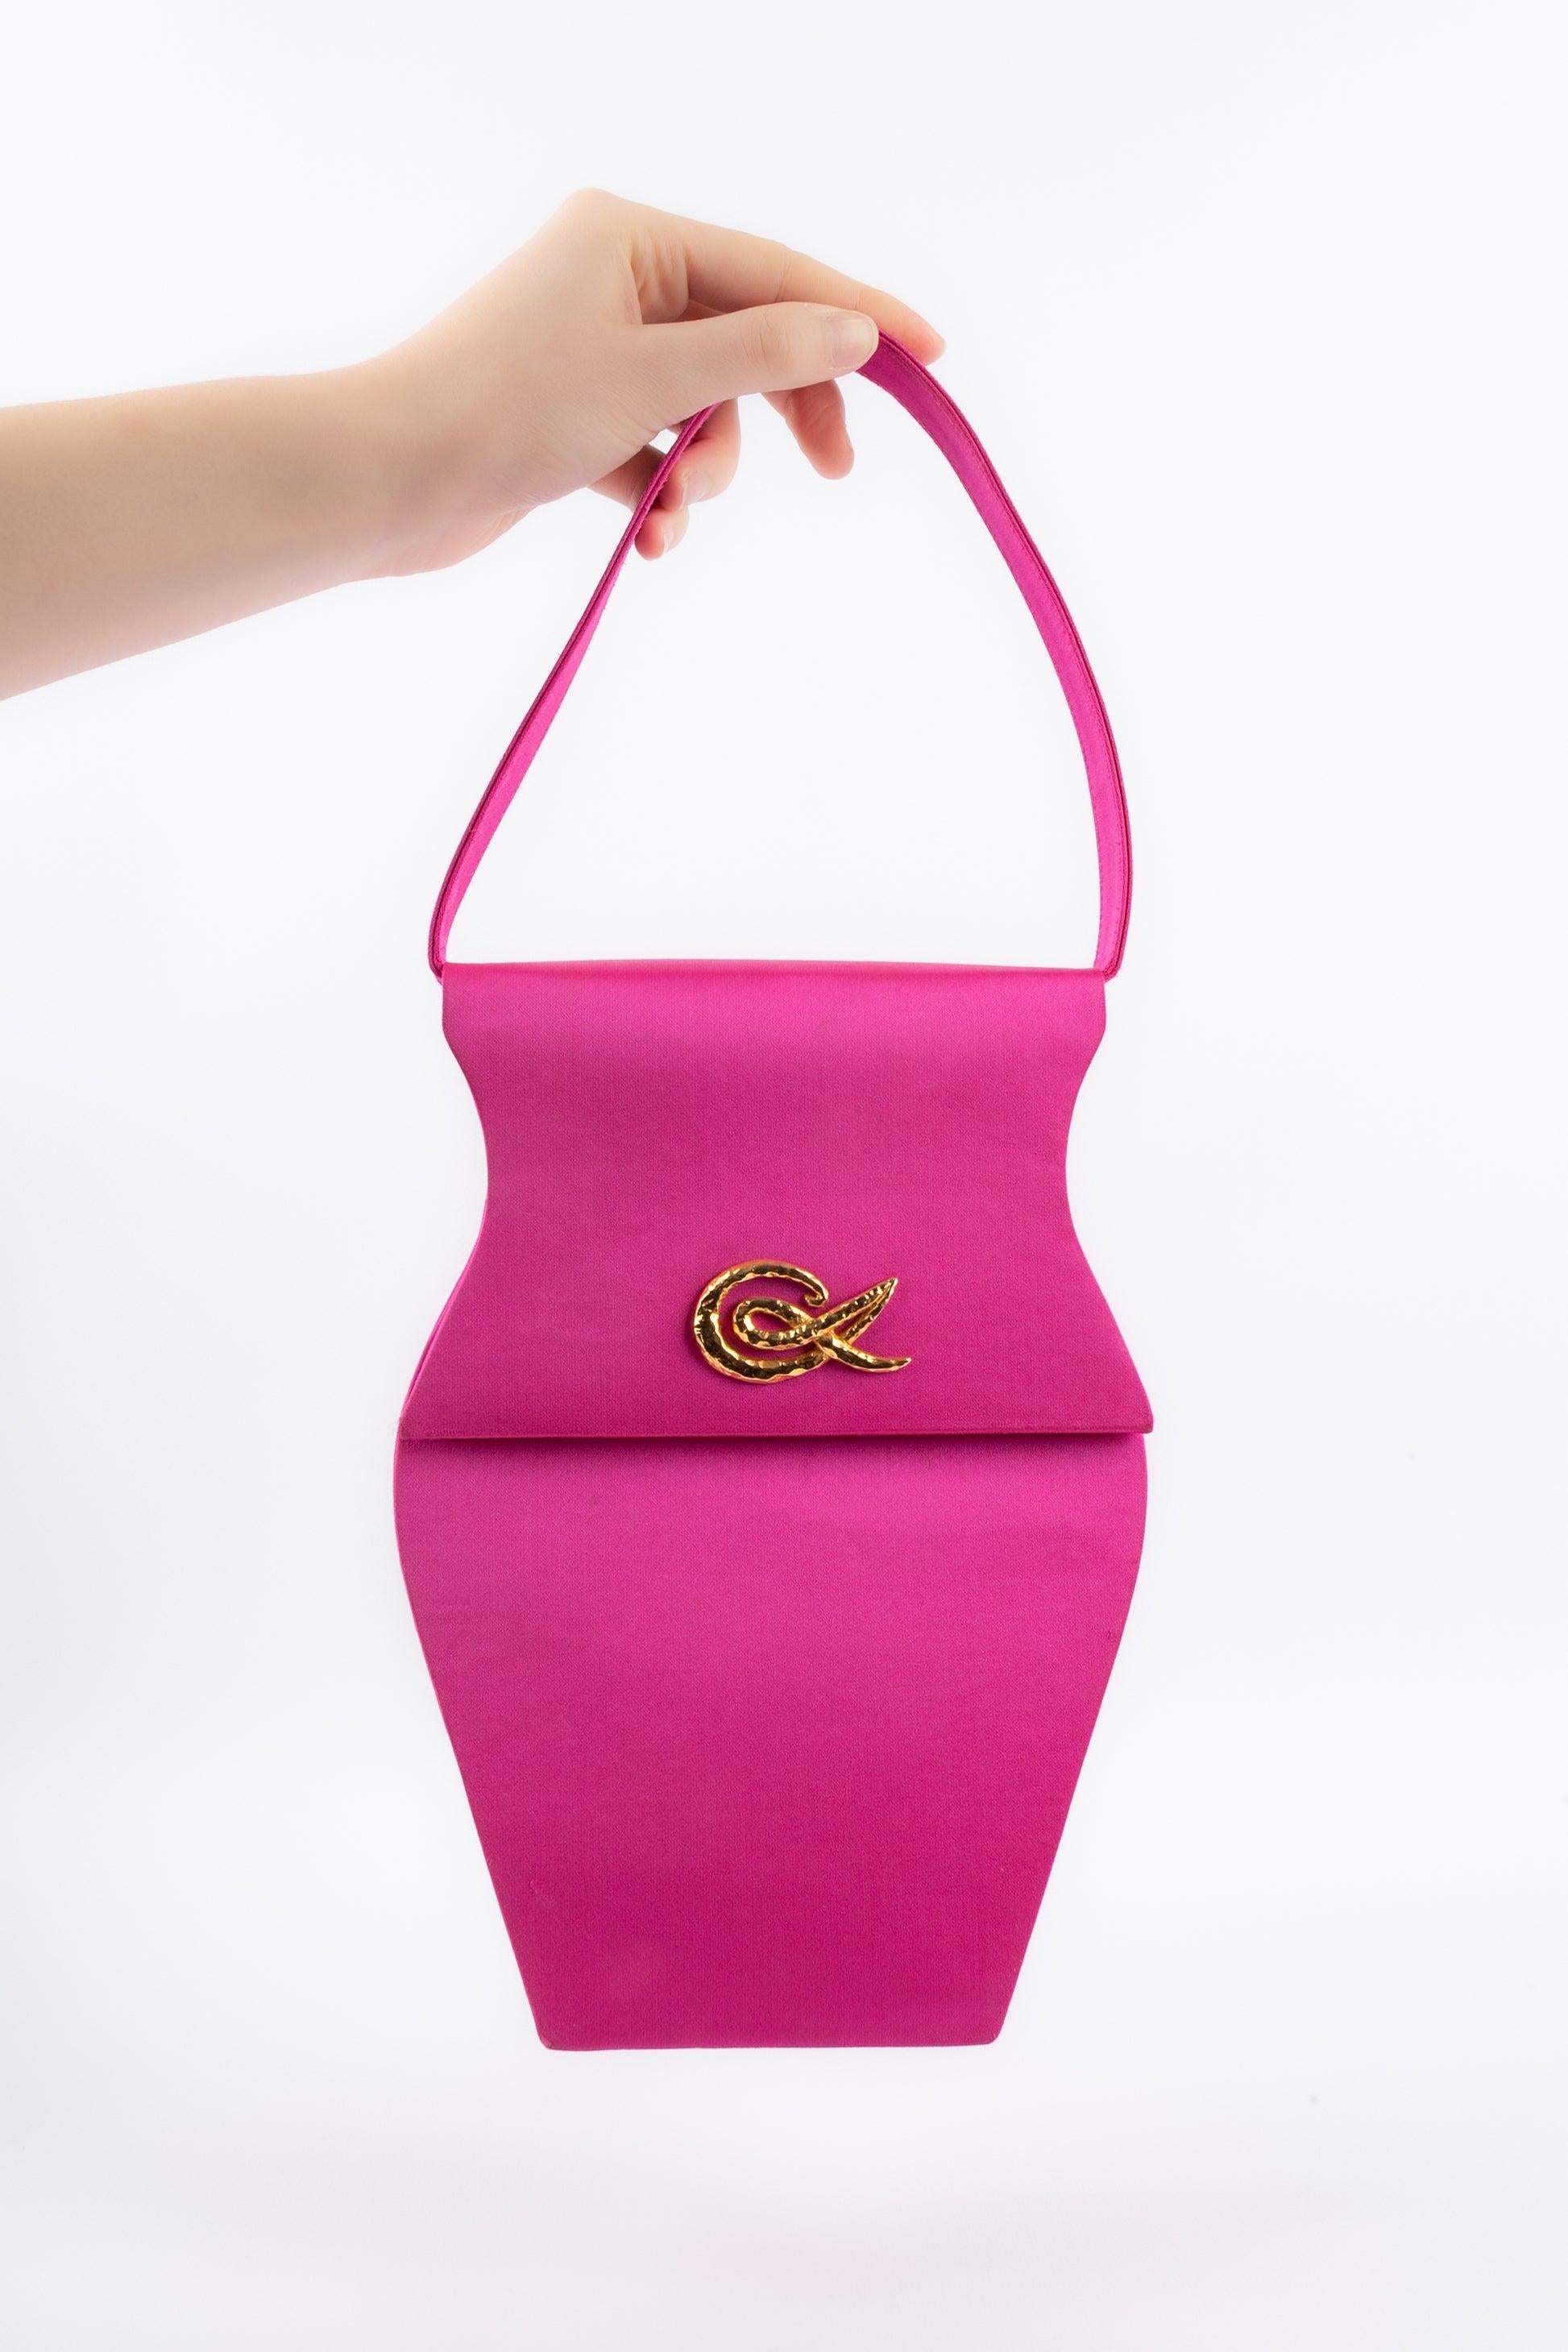 Christian Lacroix Pink Silk Bag For Sale 4